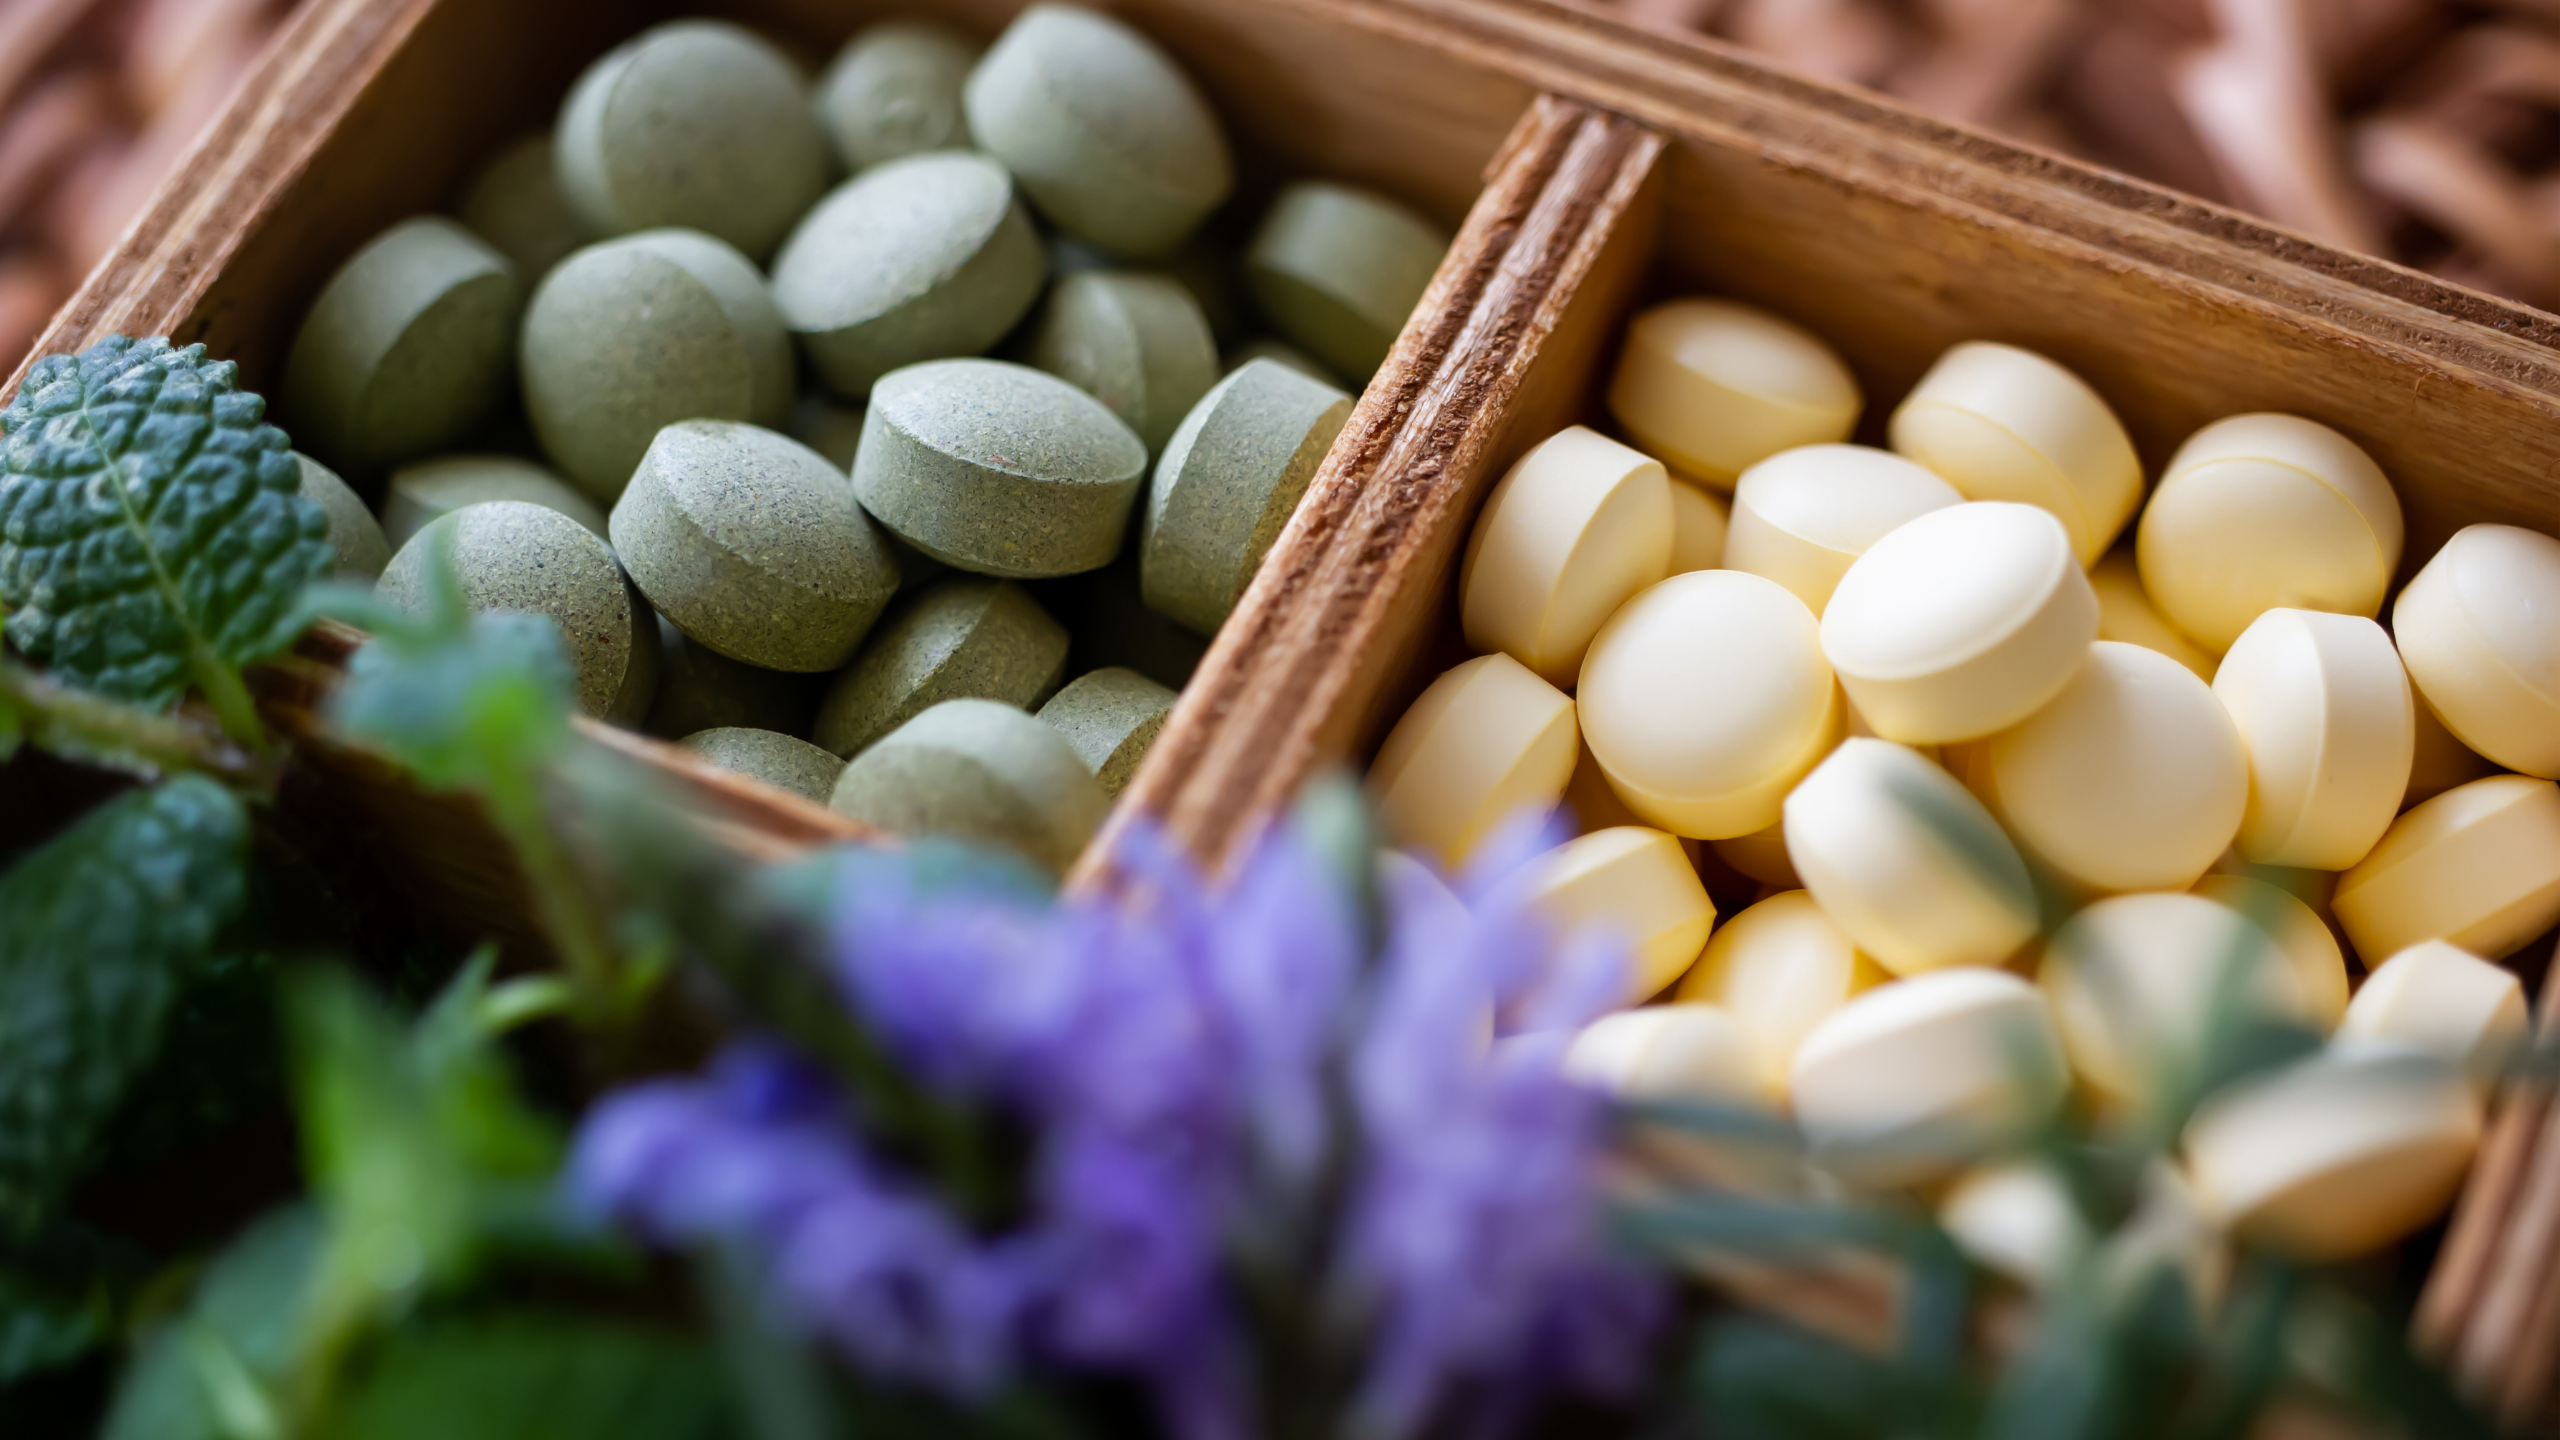 The best supplements for blood sugar control, according to science